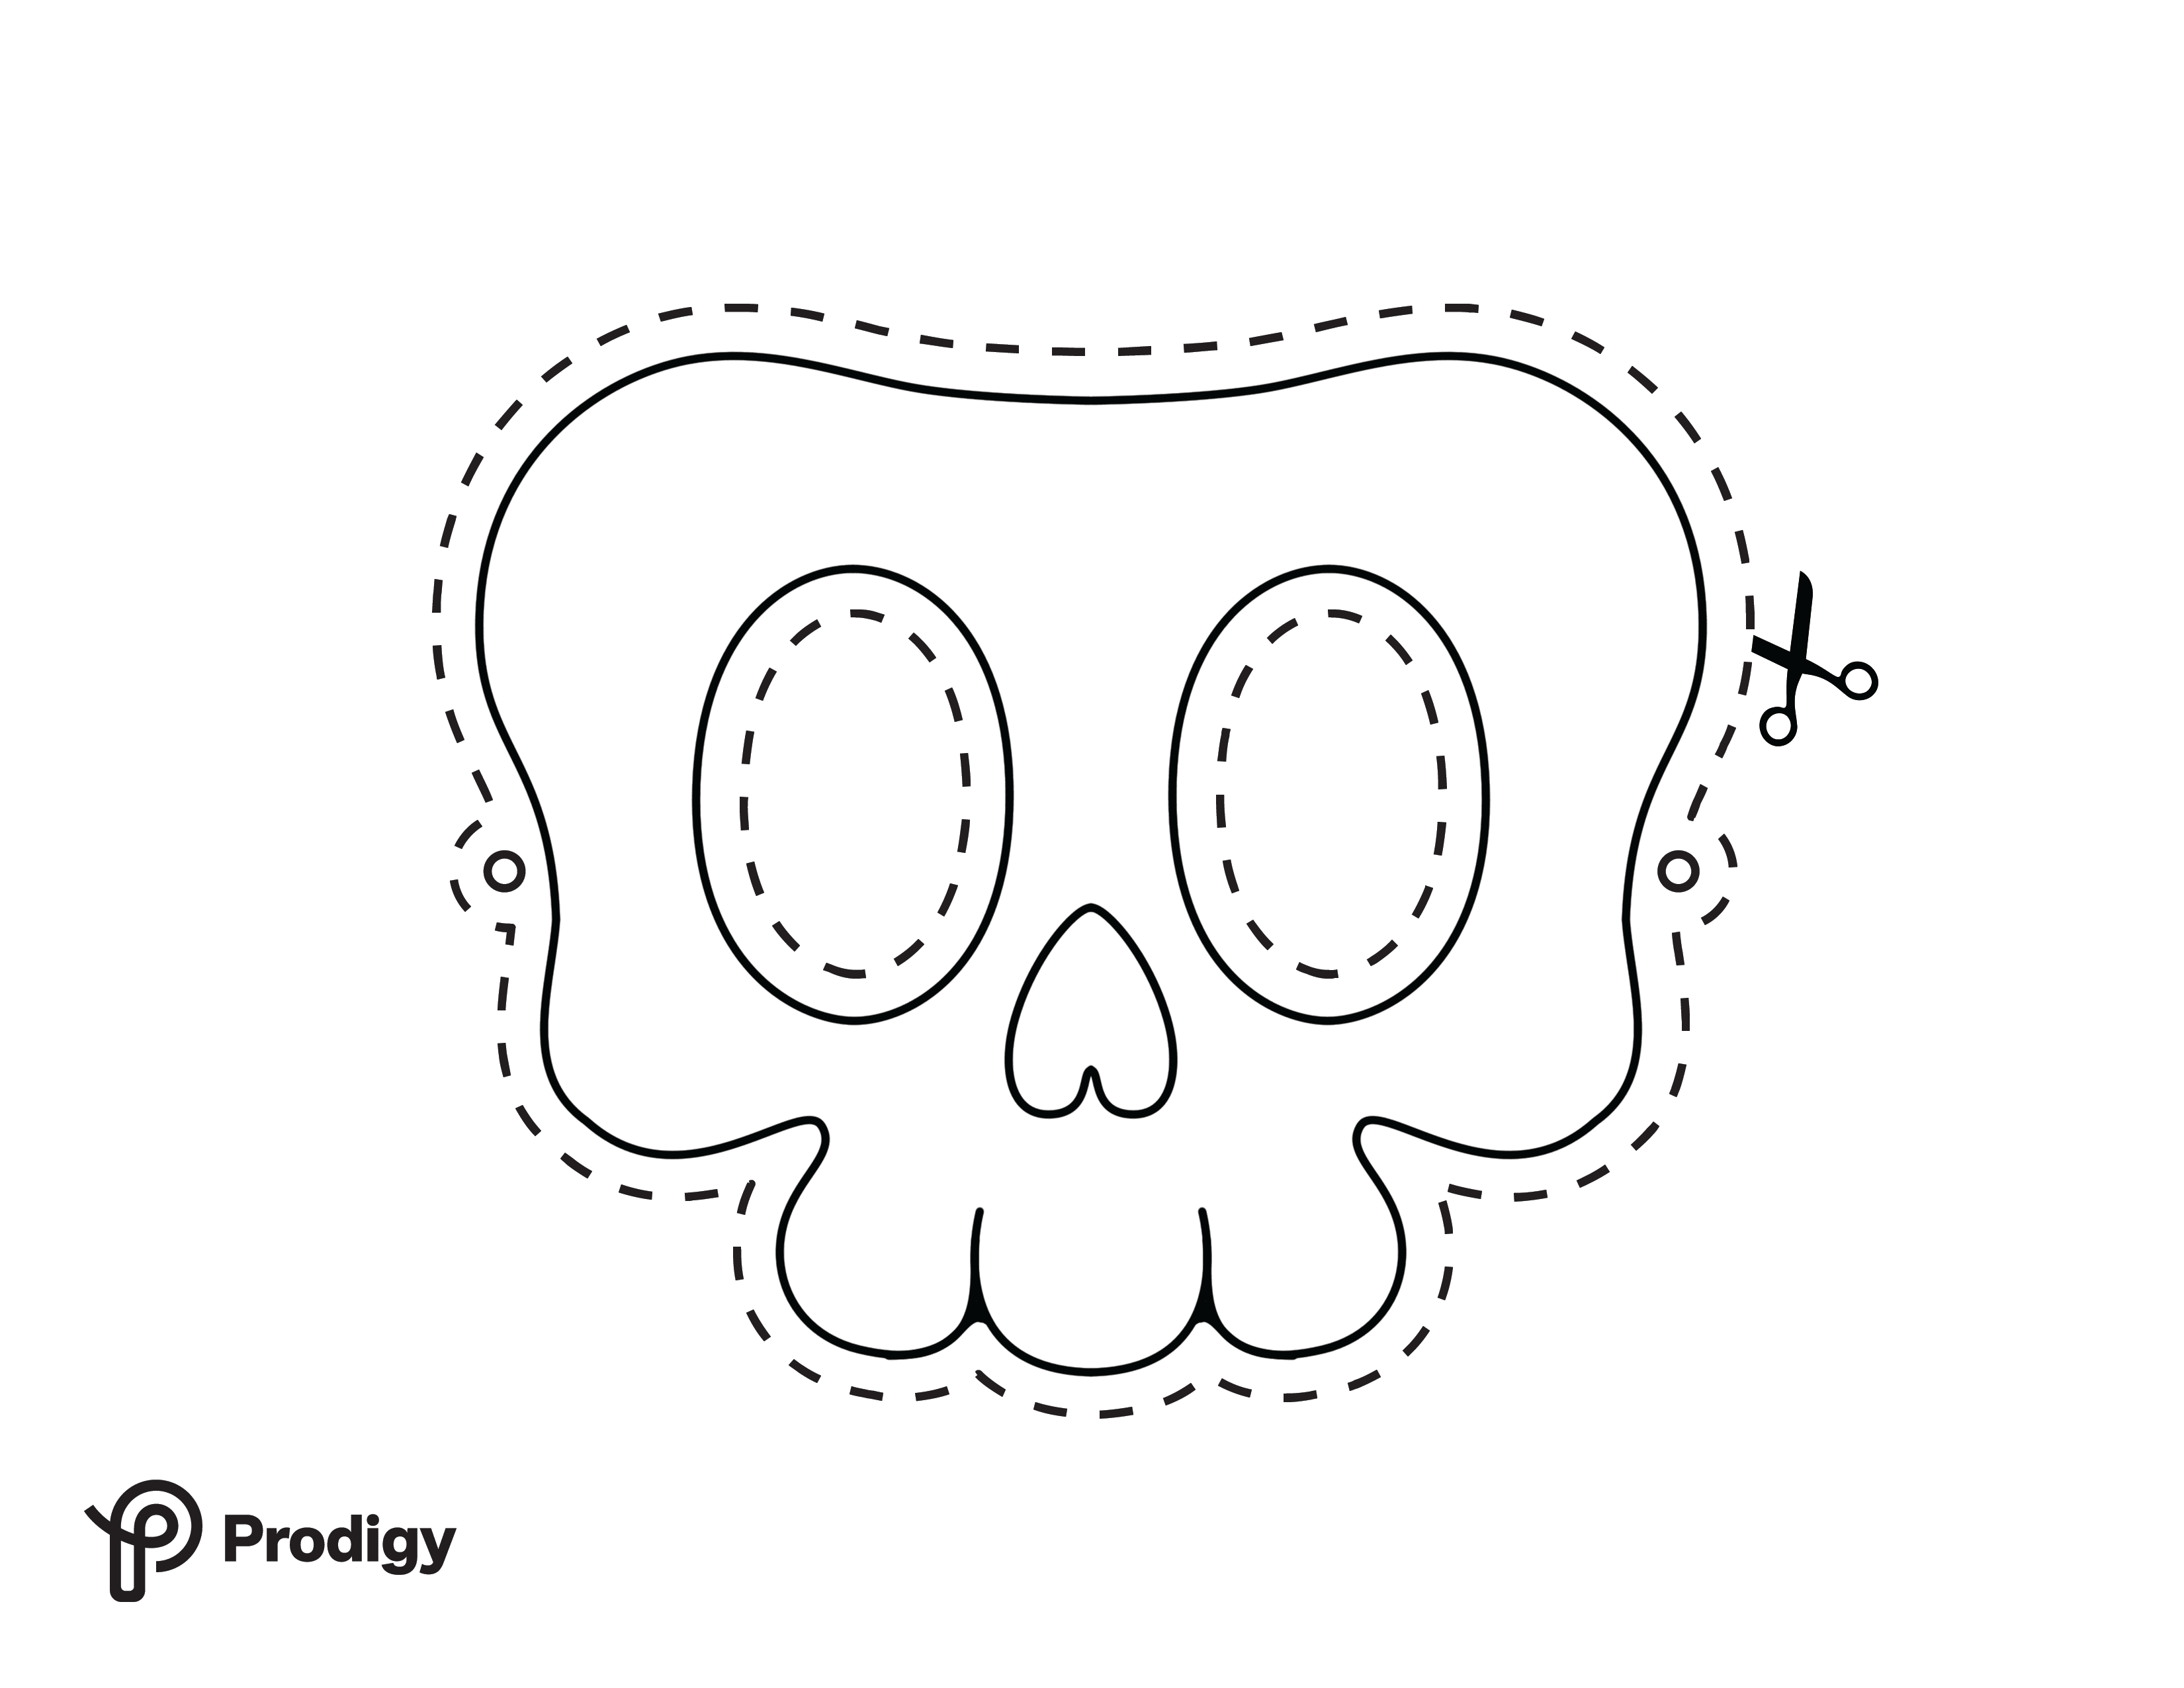 Printable Prodigy skull mask in black and white coloring page